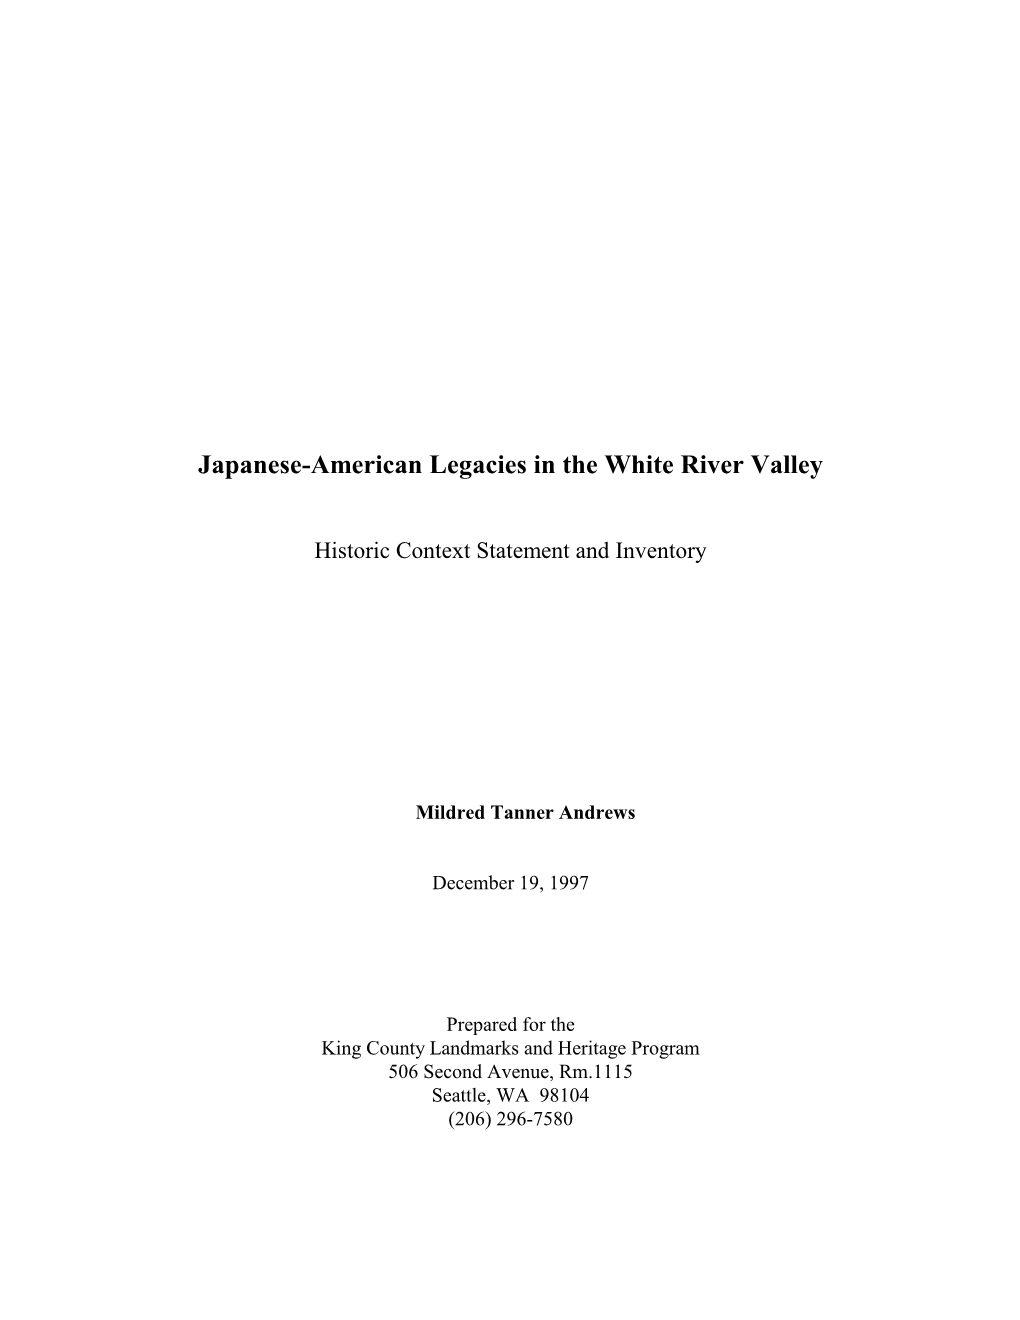 Japanese-American Legacies in the White River Valley